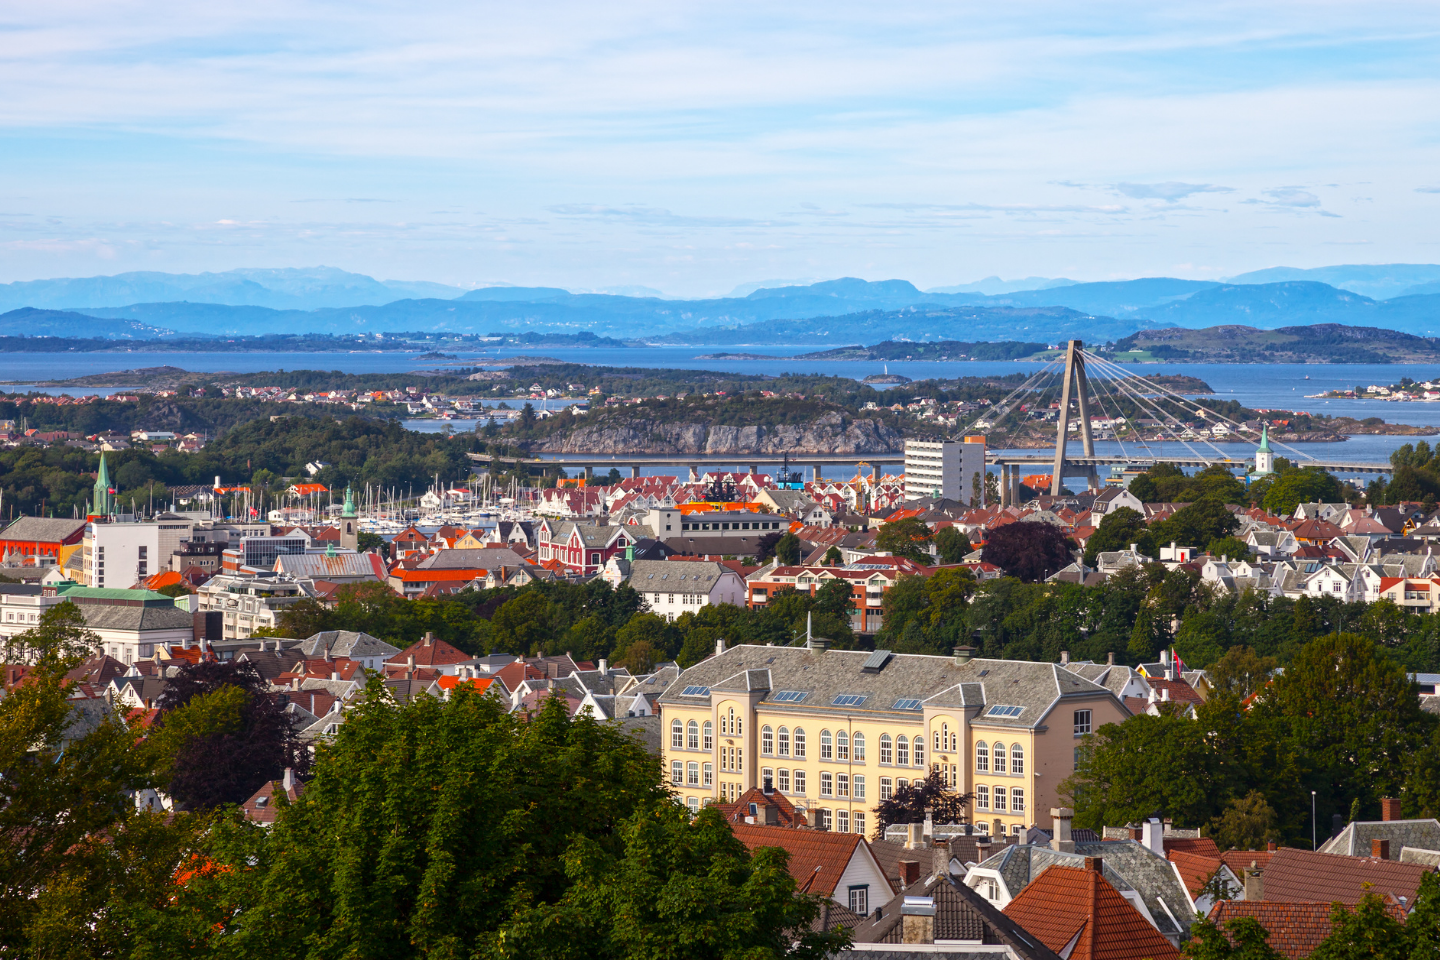 Stavanger City: Norway's Energy Capital and a Gateway to the Fjords